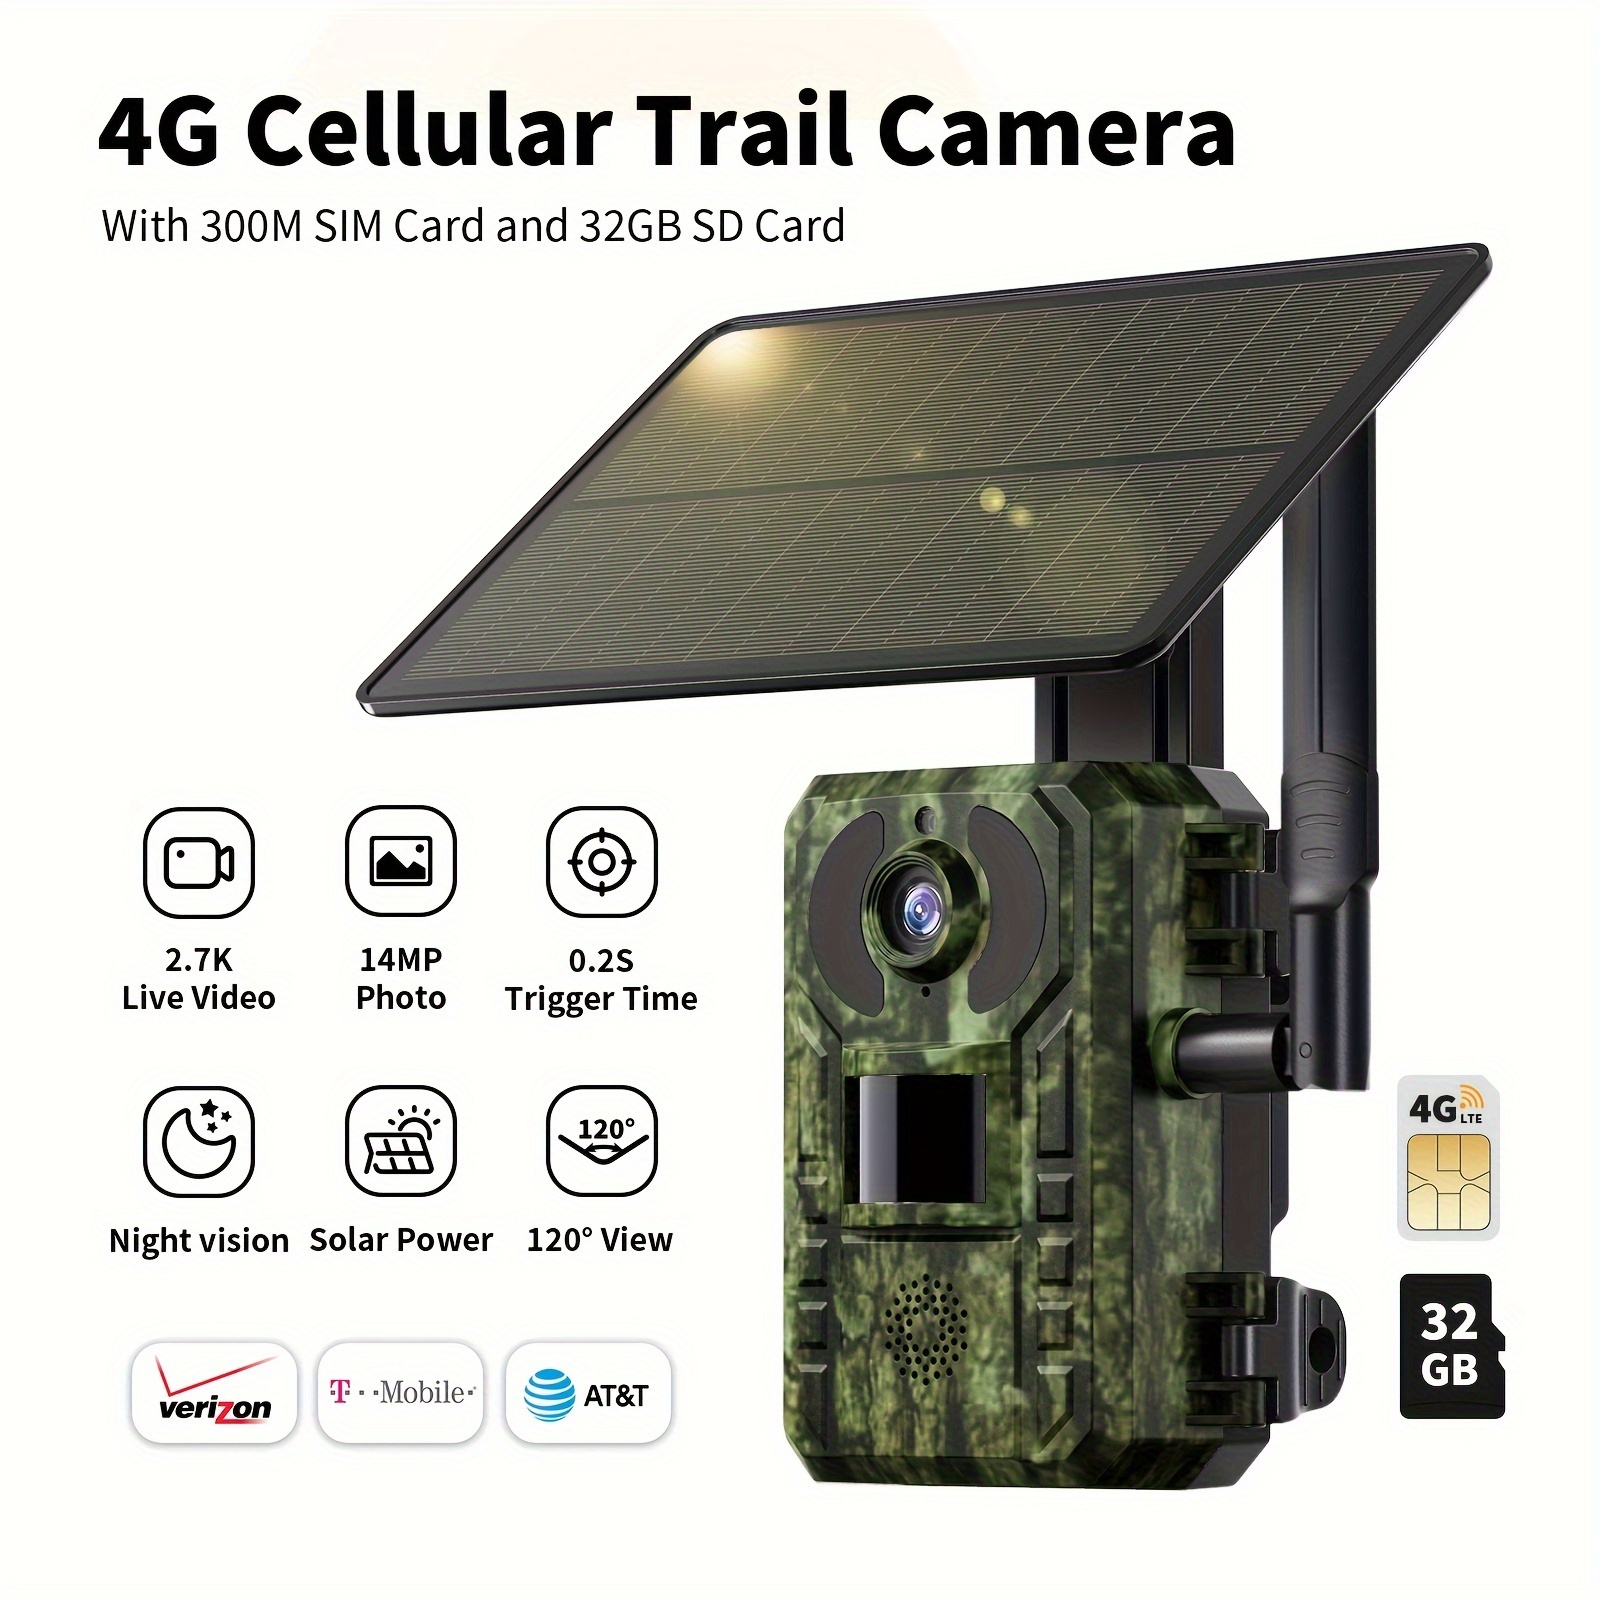 

Sehmua Cellular Trail Camera 4g Lte Include Sd&sim Card, 3rd Gen Solar Game Camera Wireless 2.7k Live Feed & 14mp Photos, Night Vision, Motion Detection, 120°wide Angle, Waterproof